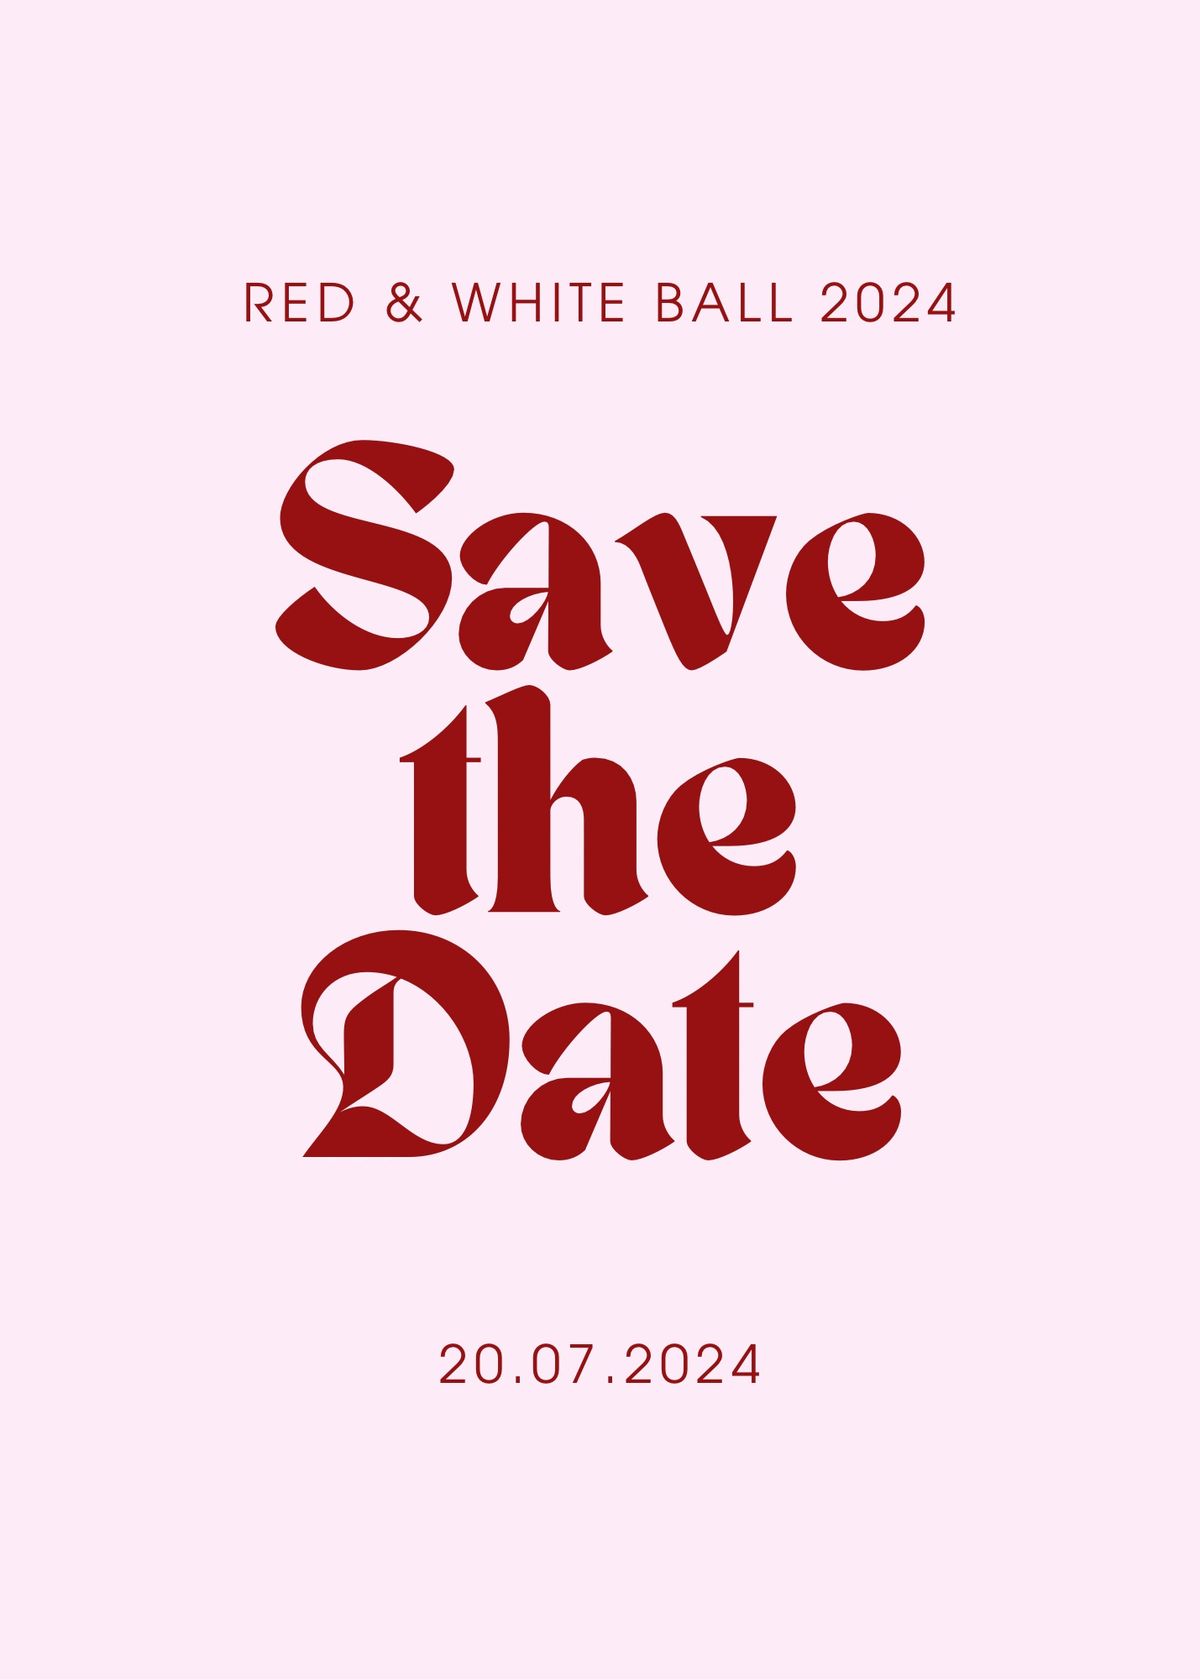 RED & WHITE BALL